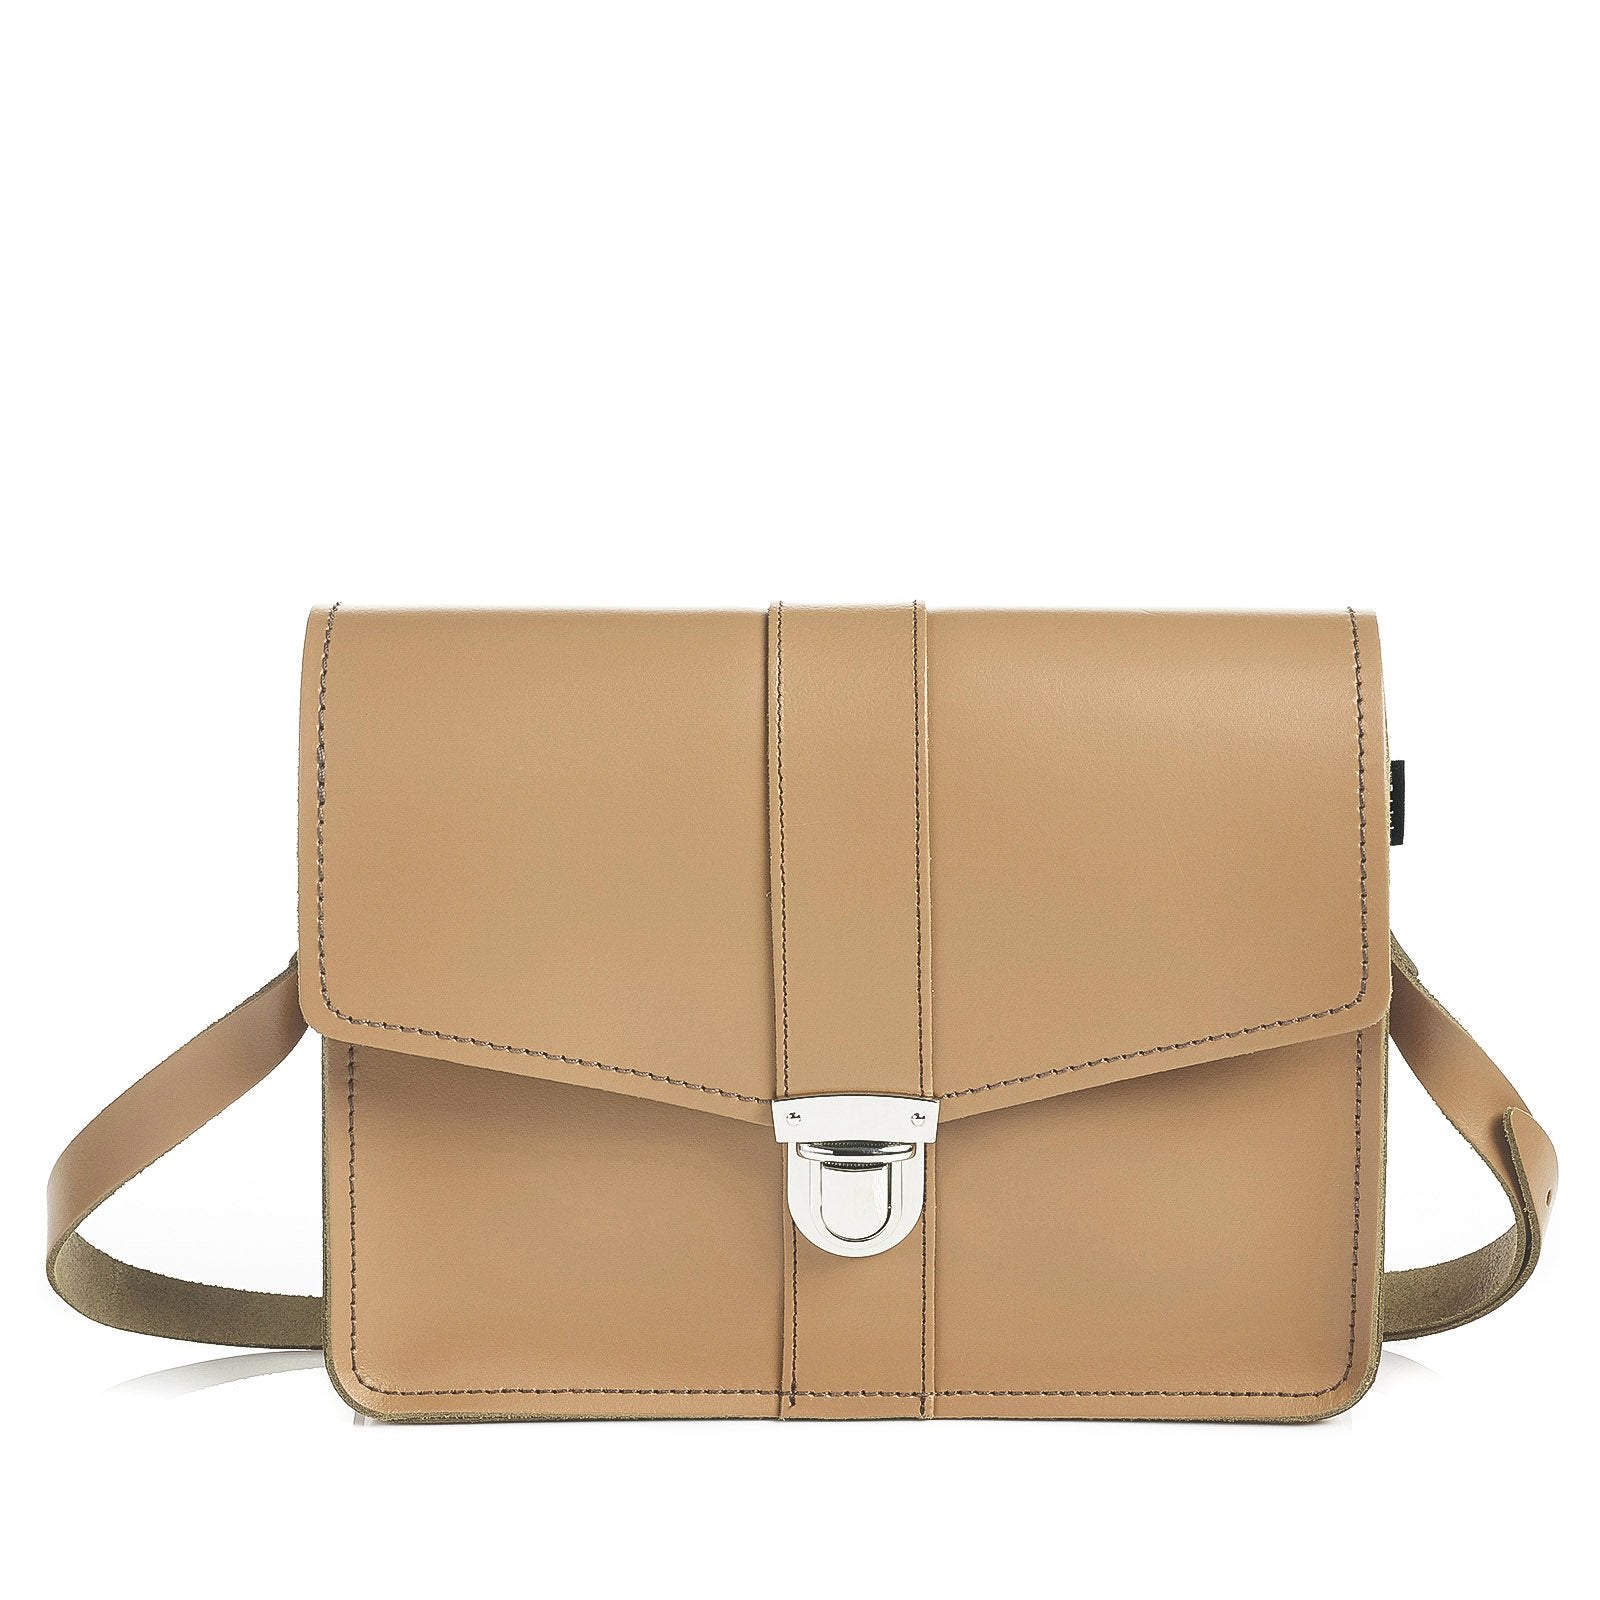 Leather Shoulder Bag - Iced Coffee